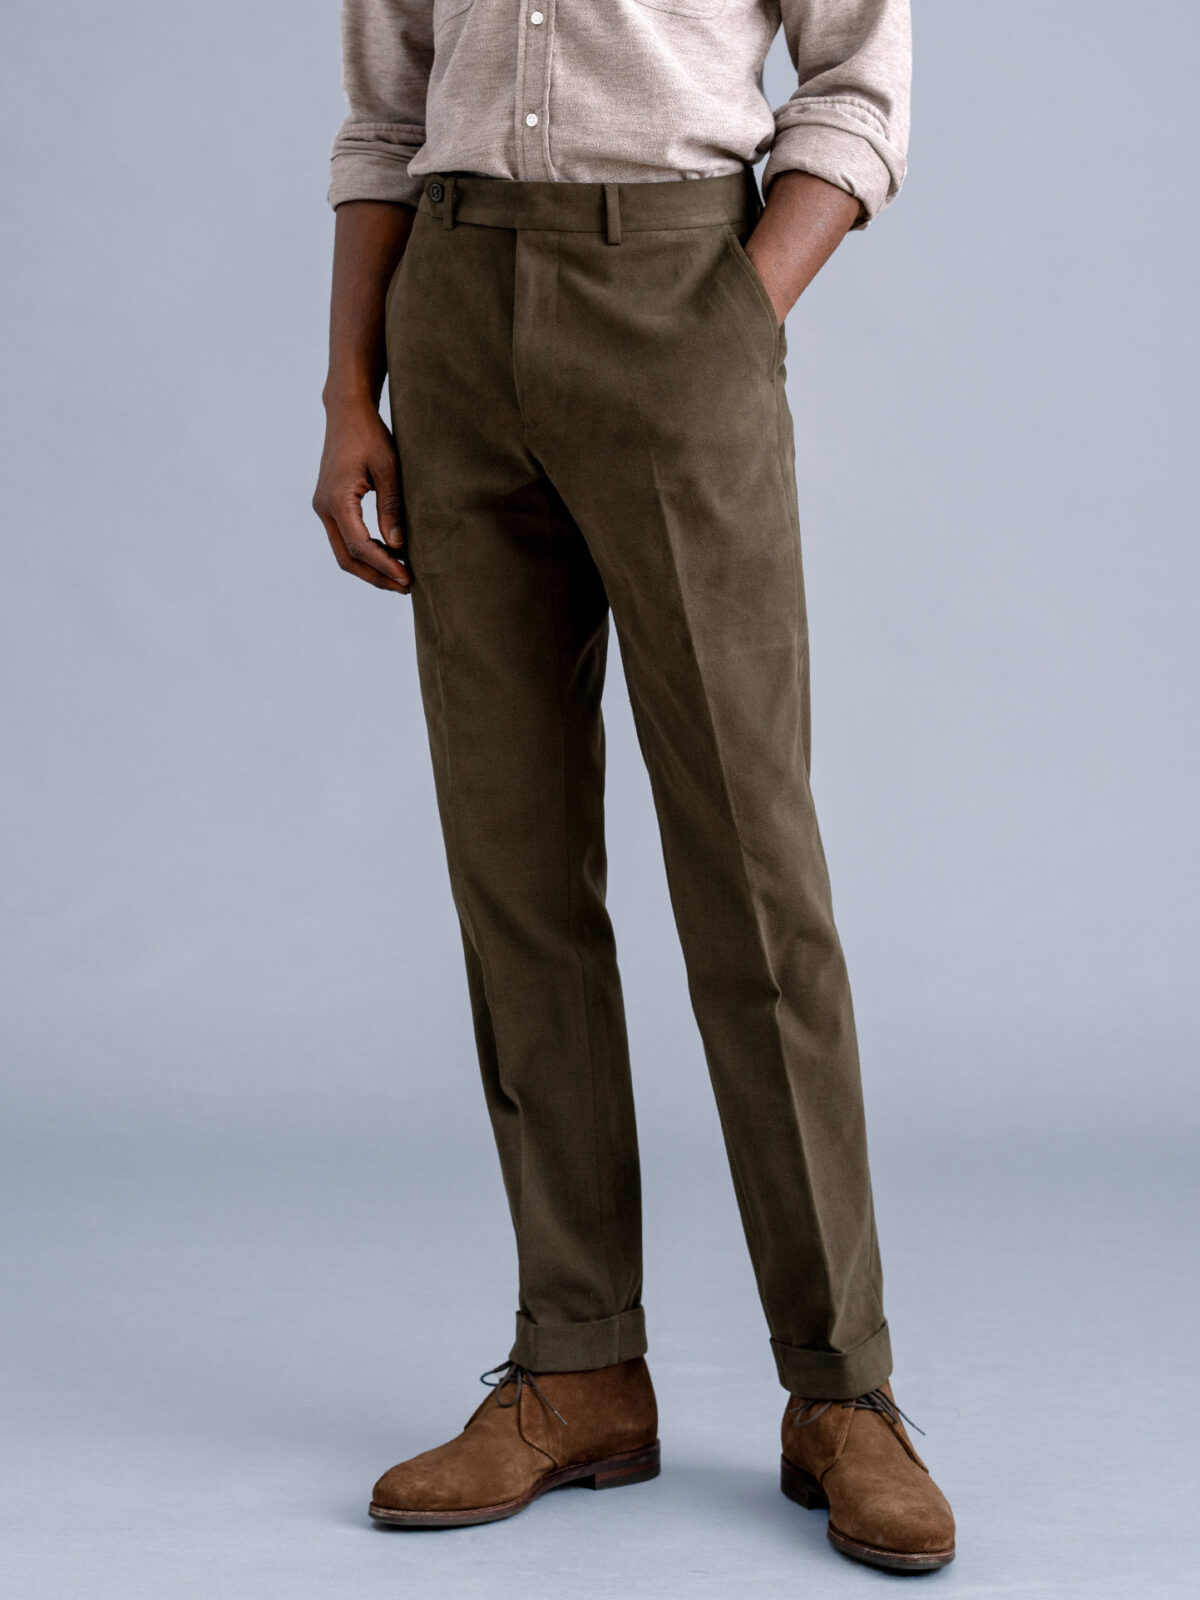 Tops To Go With Olive Green Trousers For Men | International Society of  Precision Agriculture